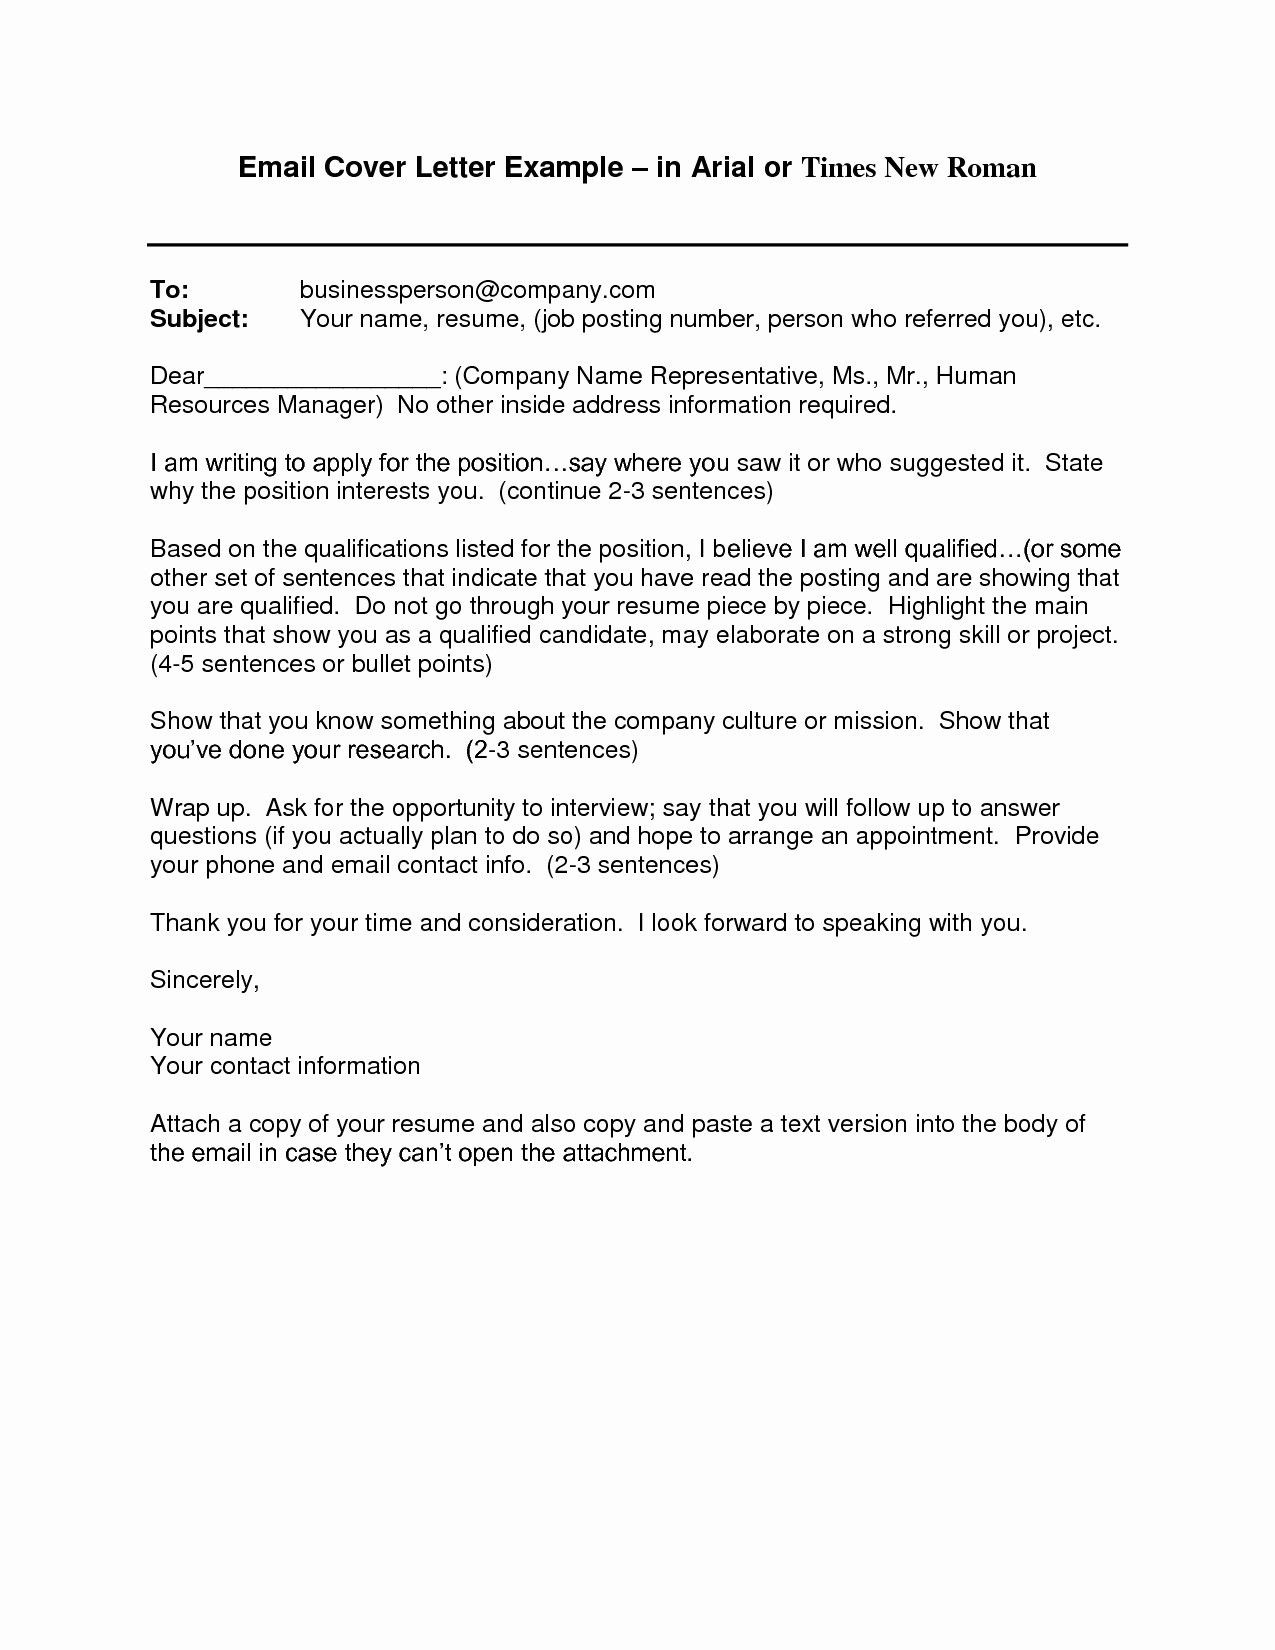 Sample Email for Sending Resume for Job Sample Email with Resume attached – Good Resume Examples